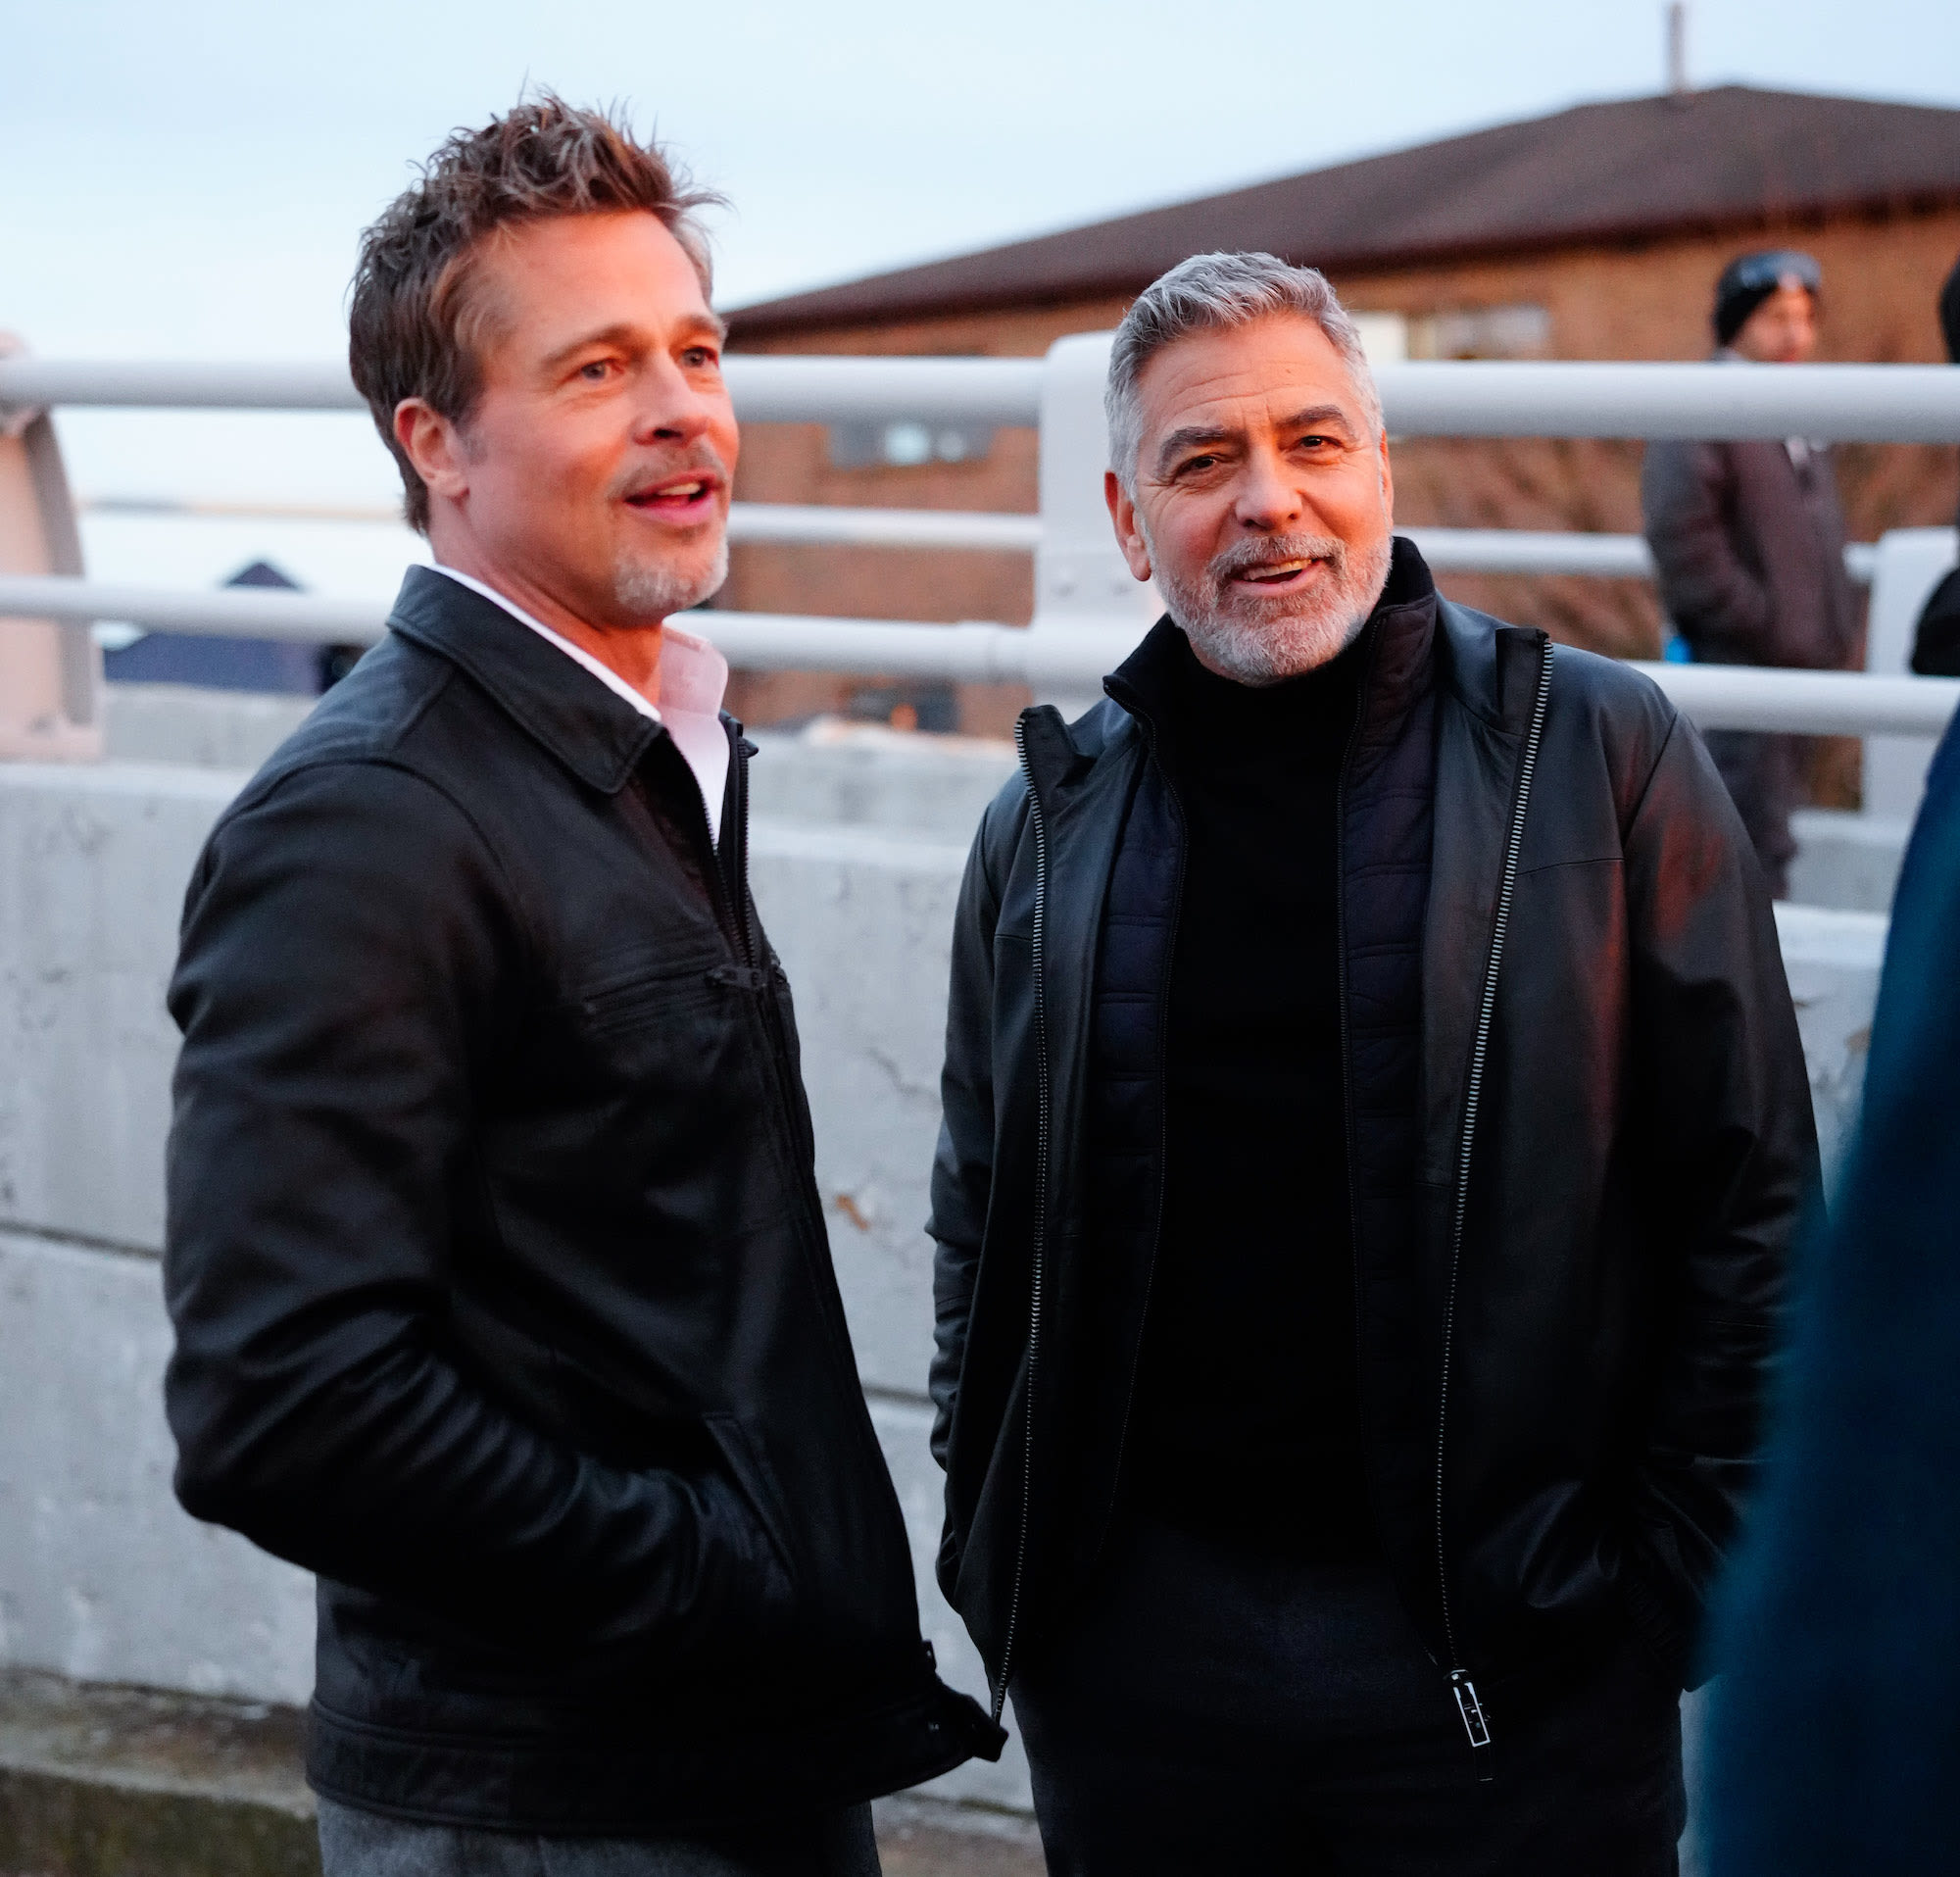 Every Time Brad Pitt and George Clooney Have Worked Together: From ‘Ocean’s’ Trilogy to ‘Wolfs’